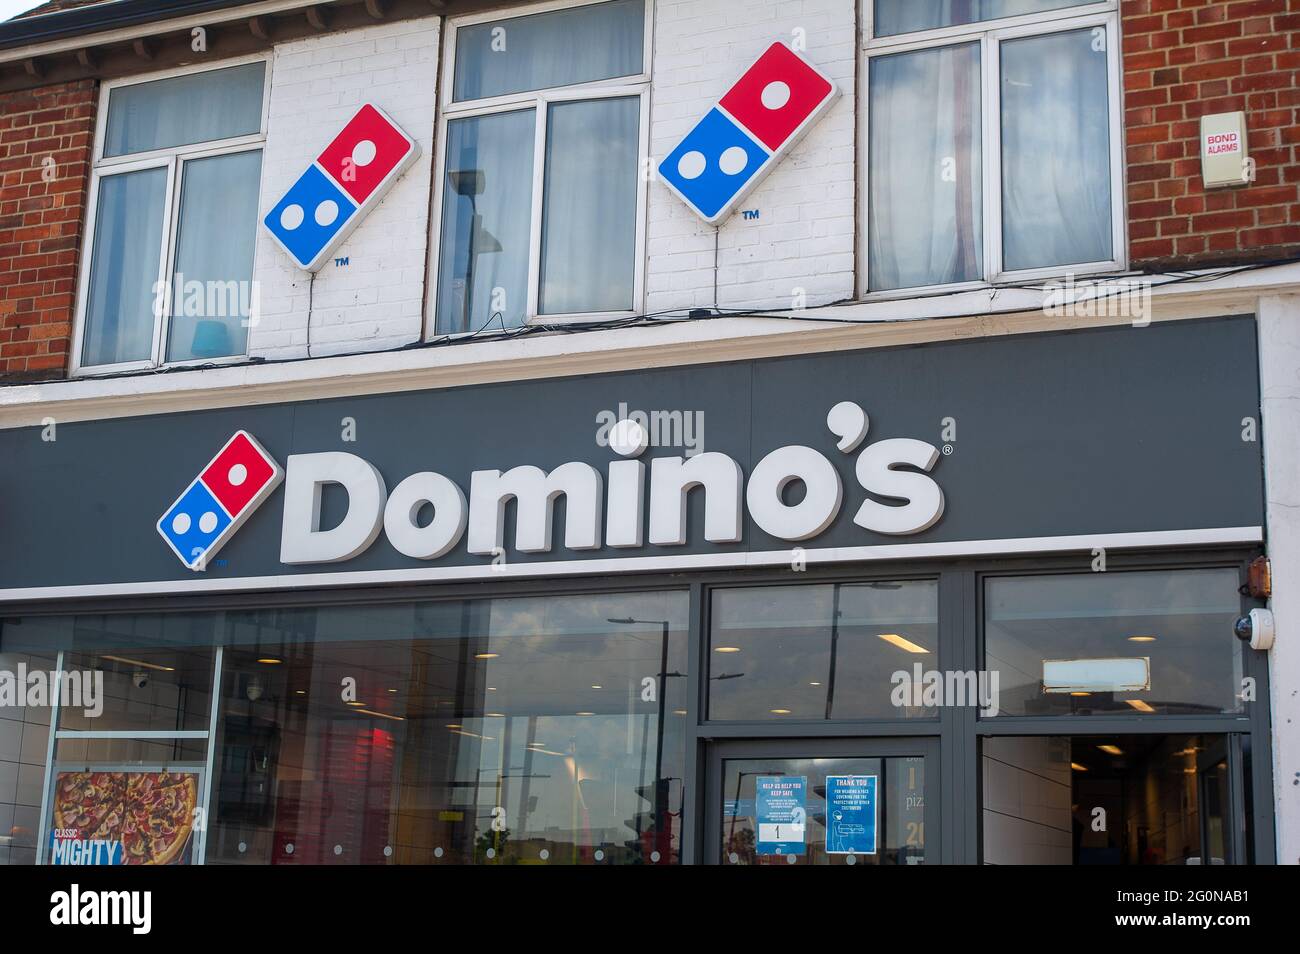 Slough, Berkshire, UK. 2nd June, 2021. Domino's Pizza are reported to be looking to recruit 5,000 chefs and drivers as the demand for take away pizzas continues to soar after the Covid-19 lockdowns. Domino's have 1,200 outlets in the UK. Domino's are also offering 1,400 jobs as part of the Government's Kickstart Scheme. Credit: Maureen McLean/Alamy Stock Photo